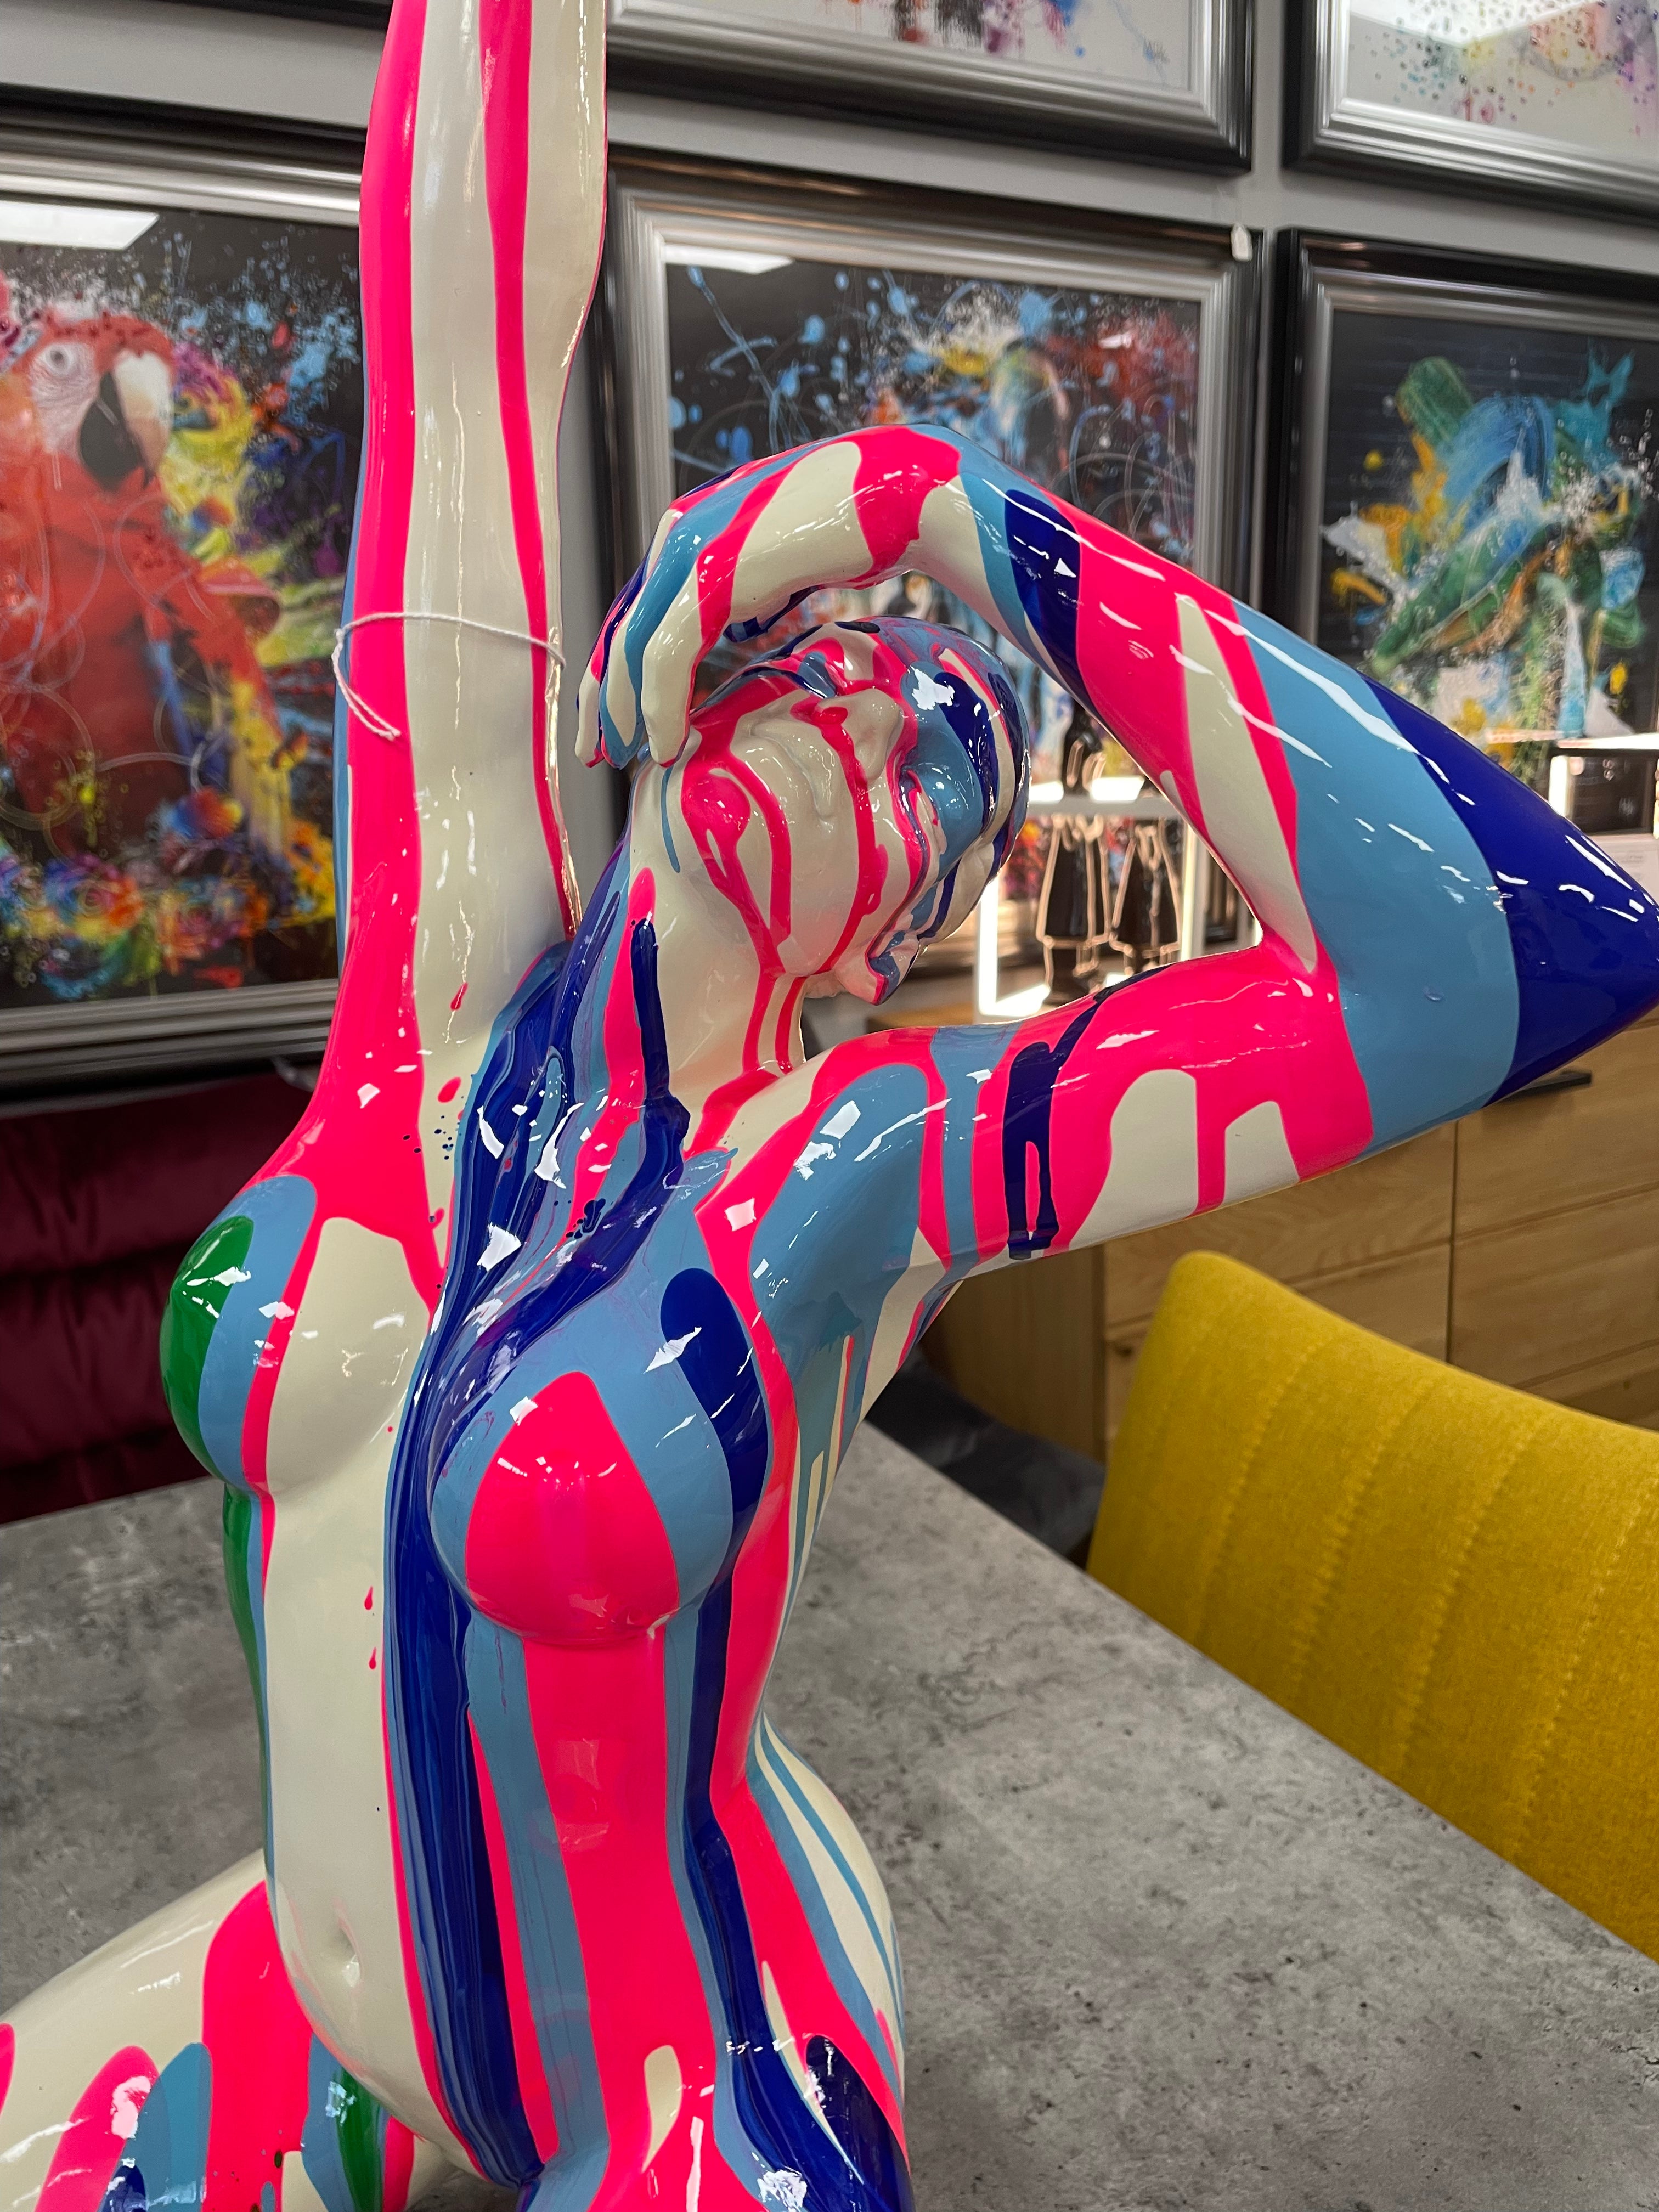 Pink and Blue Lady Sculpture - Raised Arm